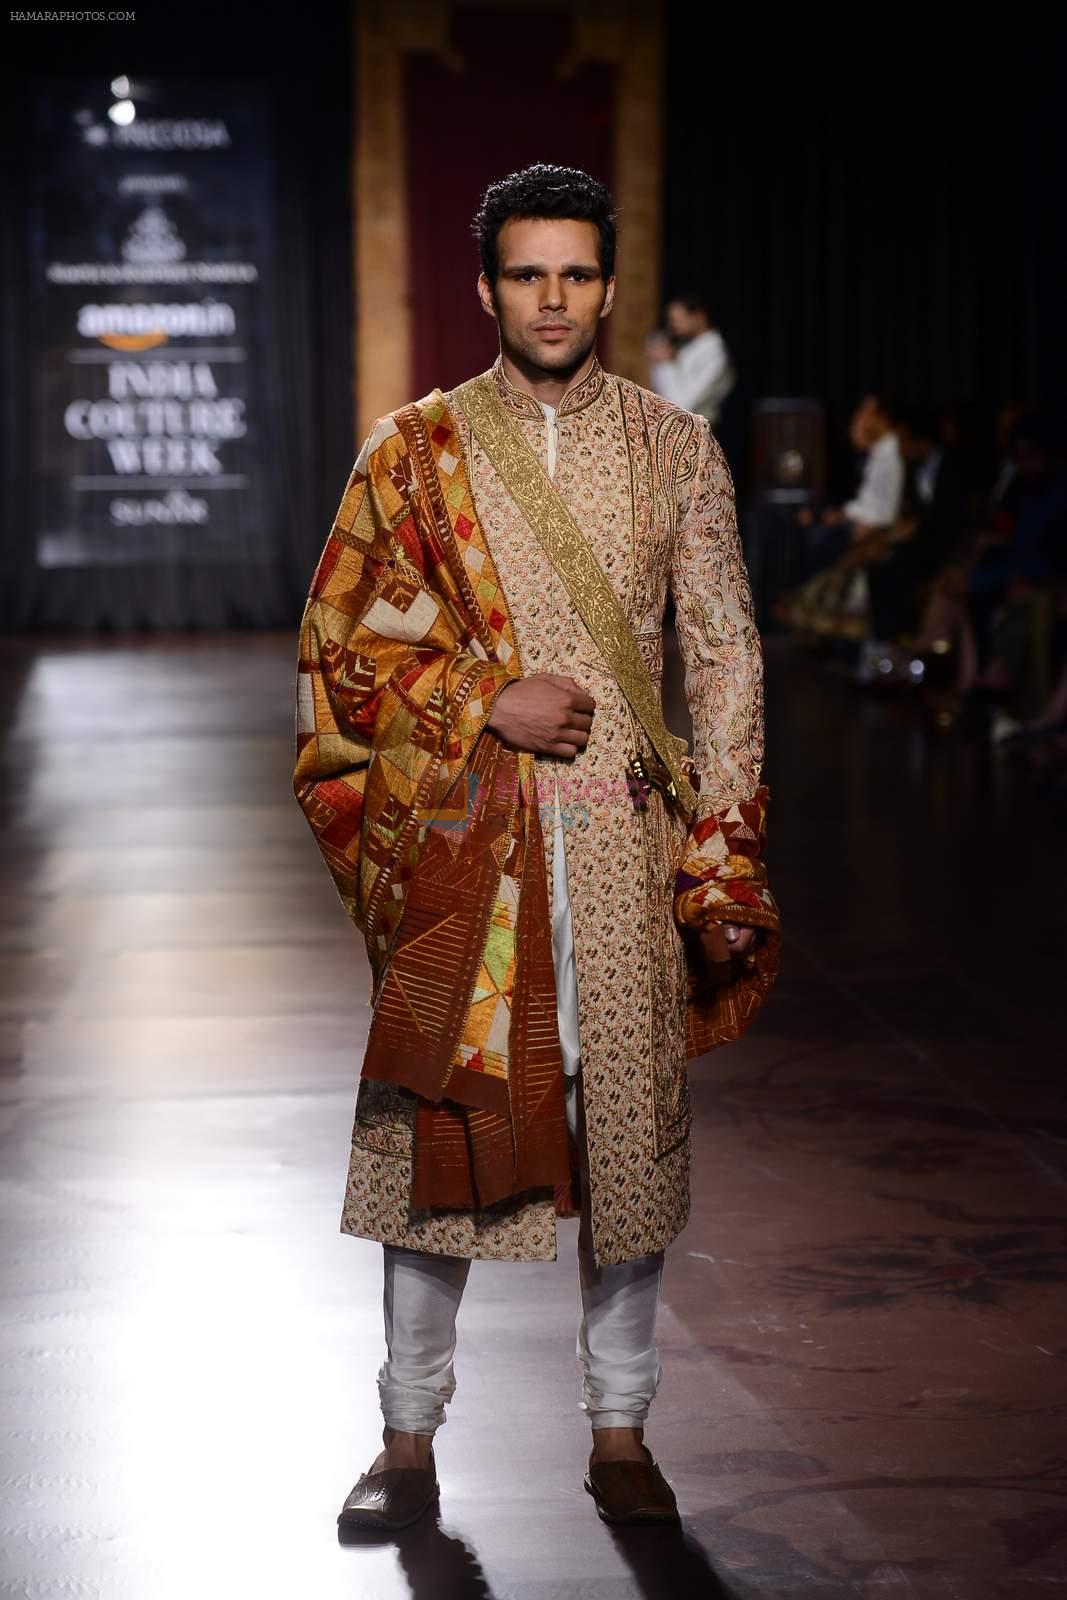 Model walk for Harpreet and Rimple Narula Show at India Couture Week 2015 on 1st Aug 2015